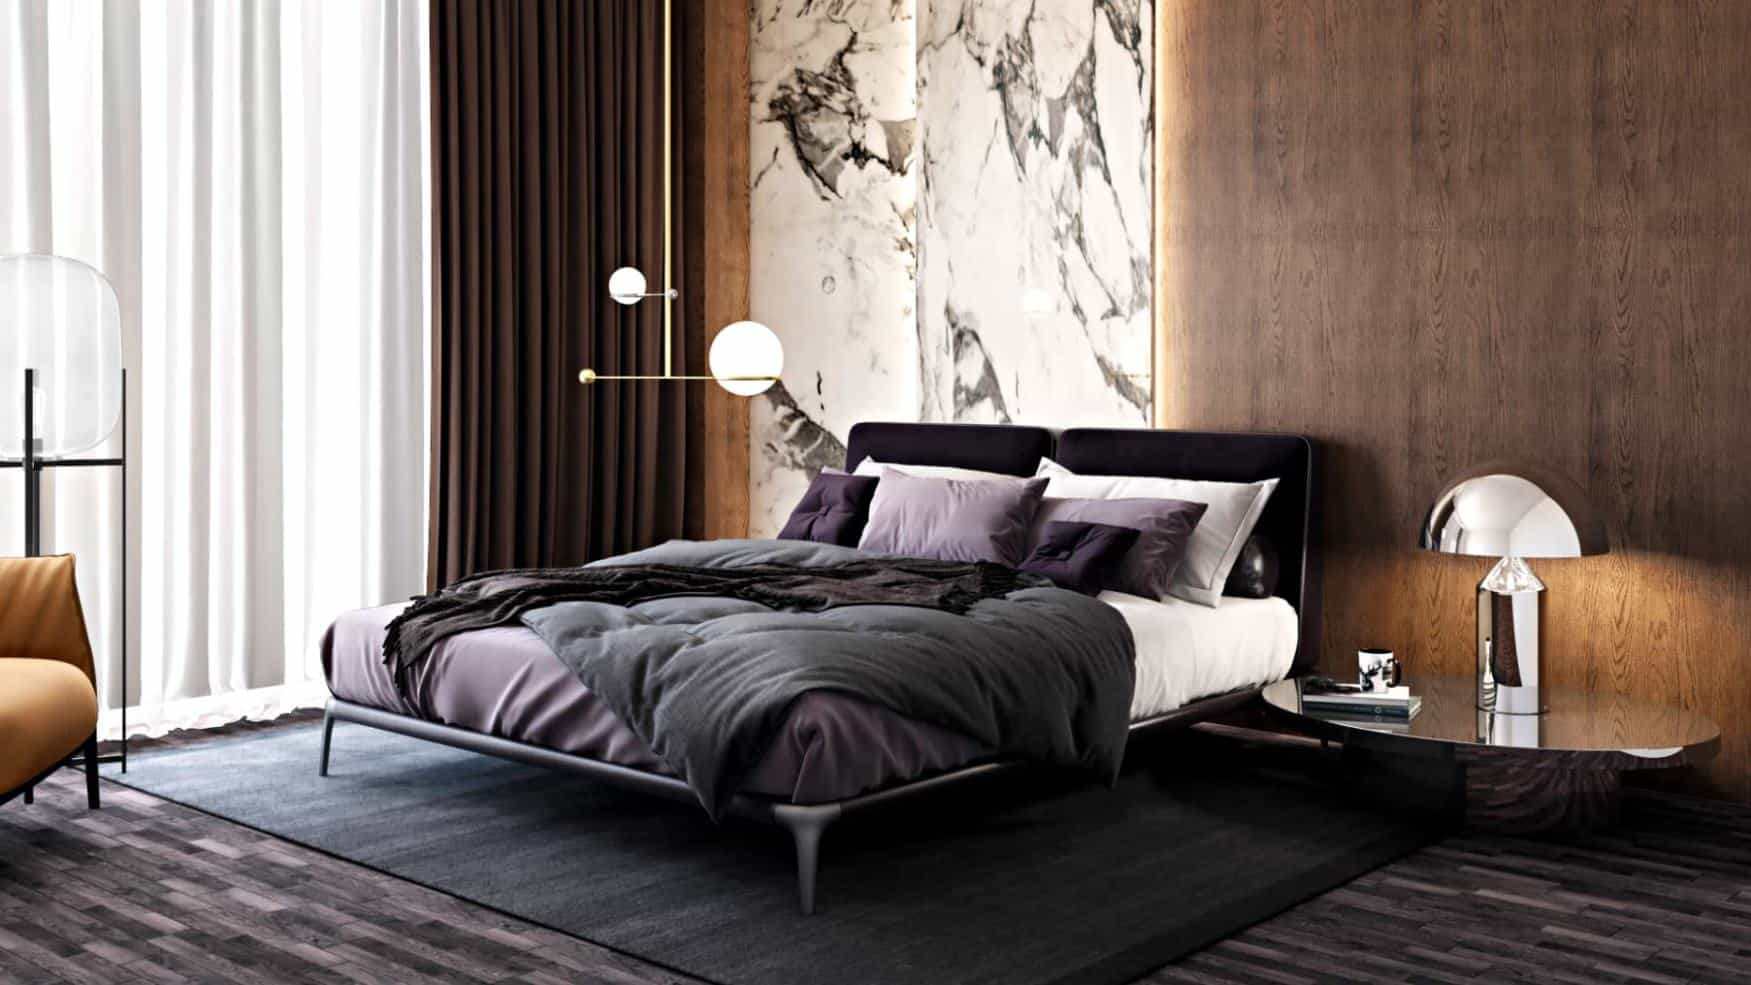 A designer queen size bed in deep purple colour